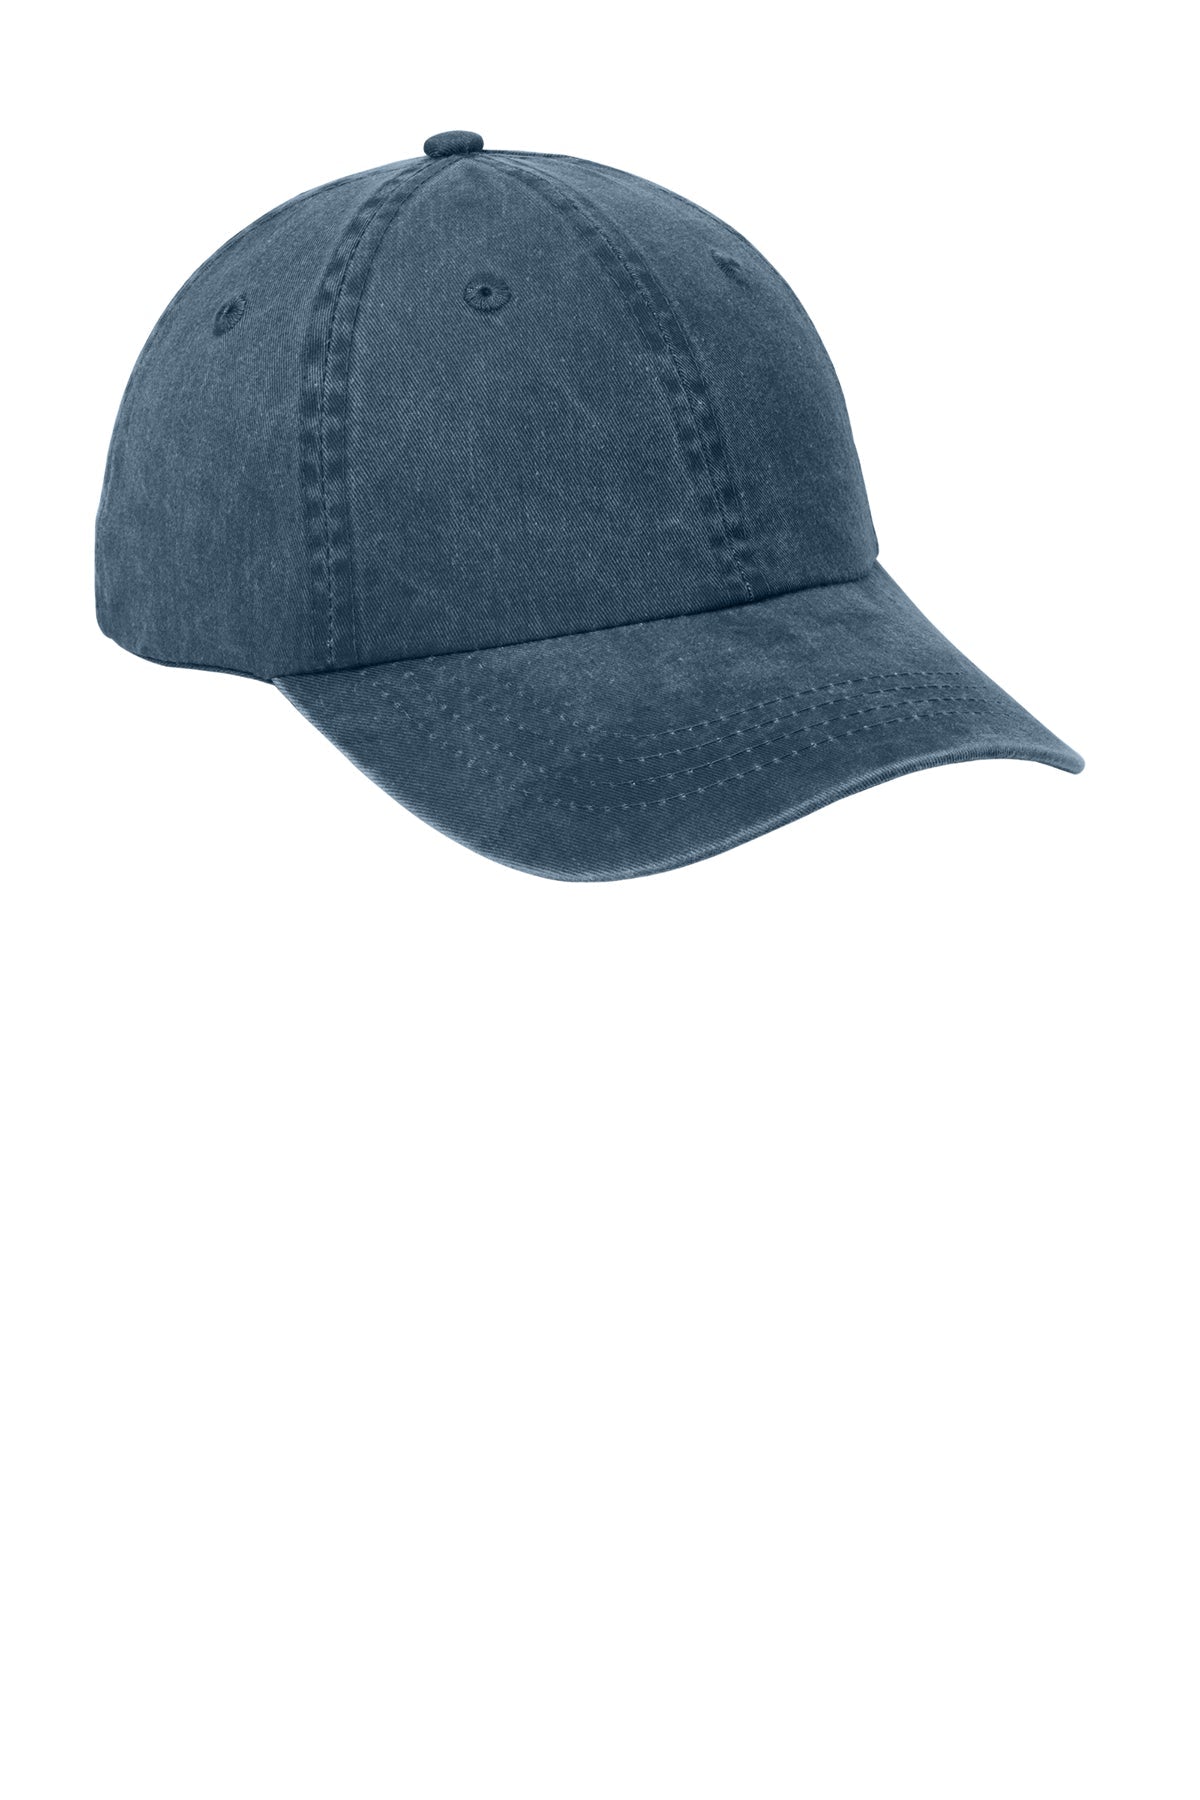 Port & Company Pigment Dyed Customized Caps, Navy